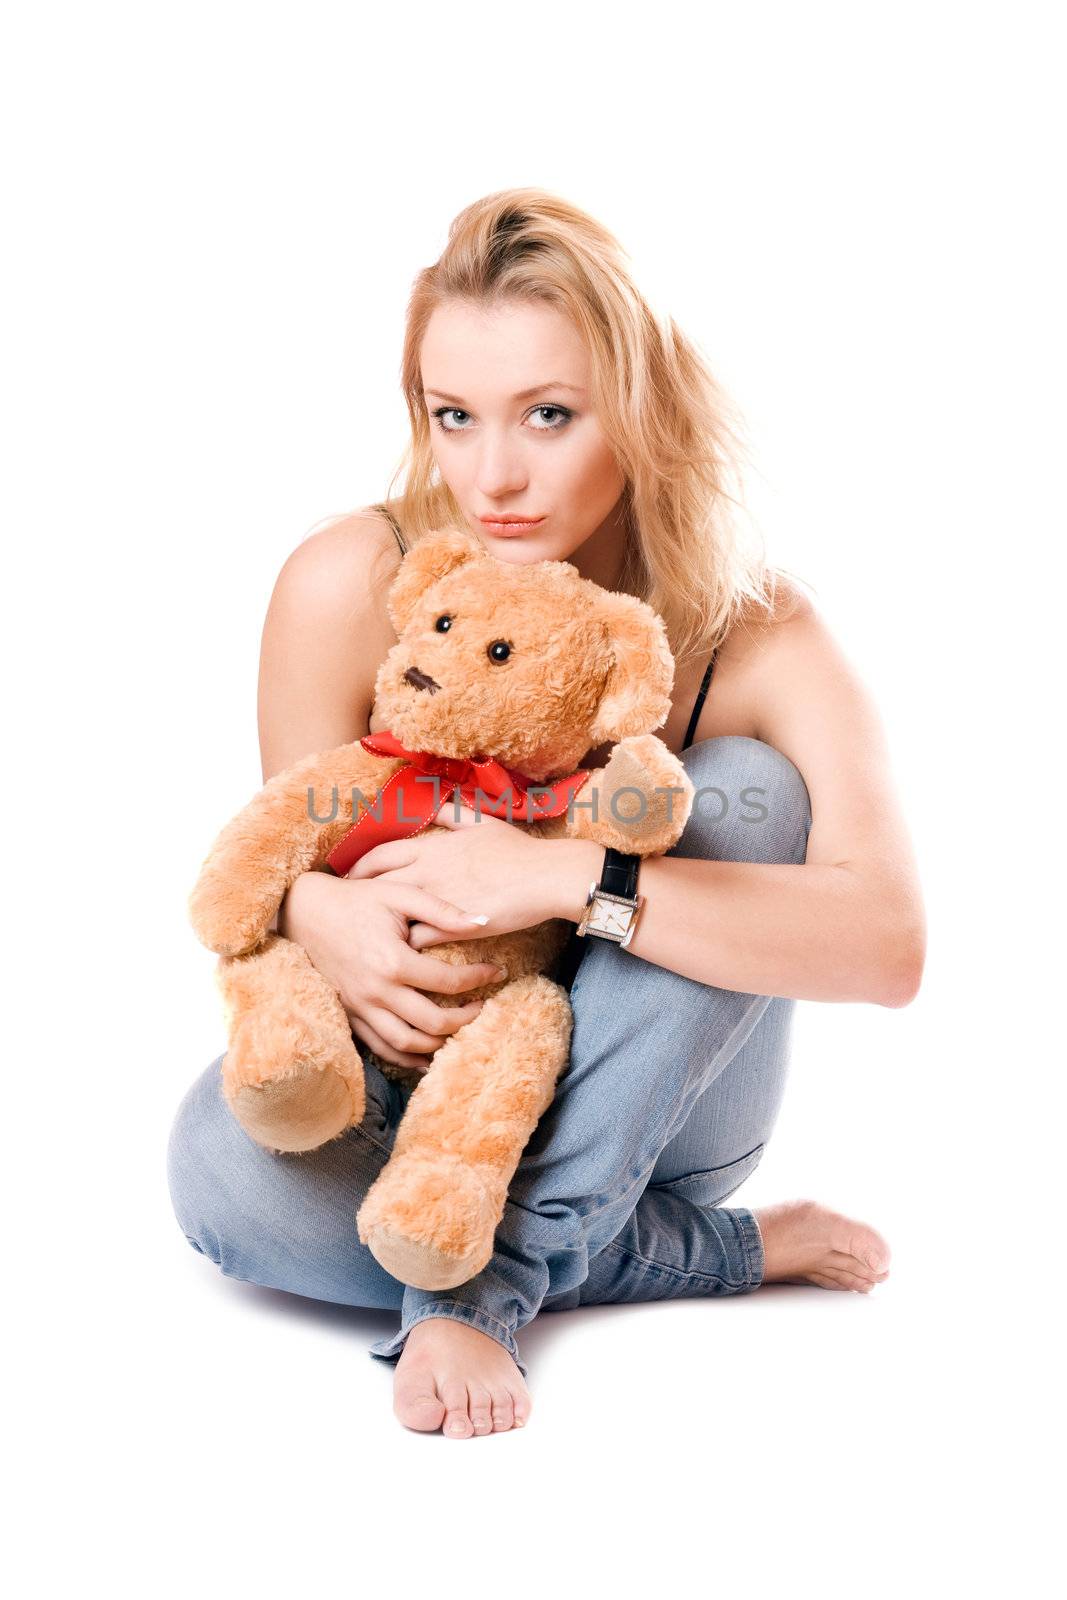 Beautiful blonde with a teddy bear. Isolated